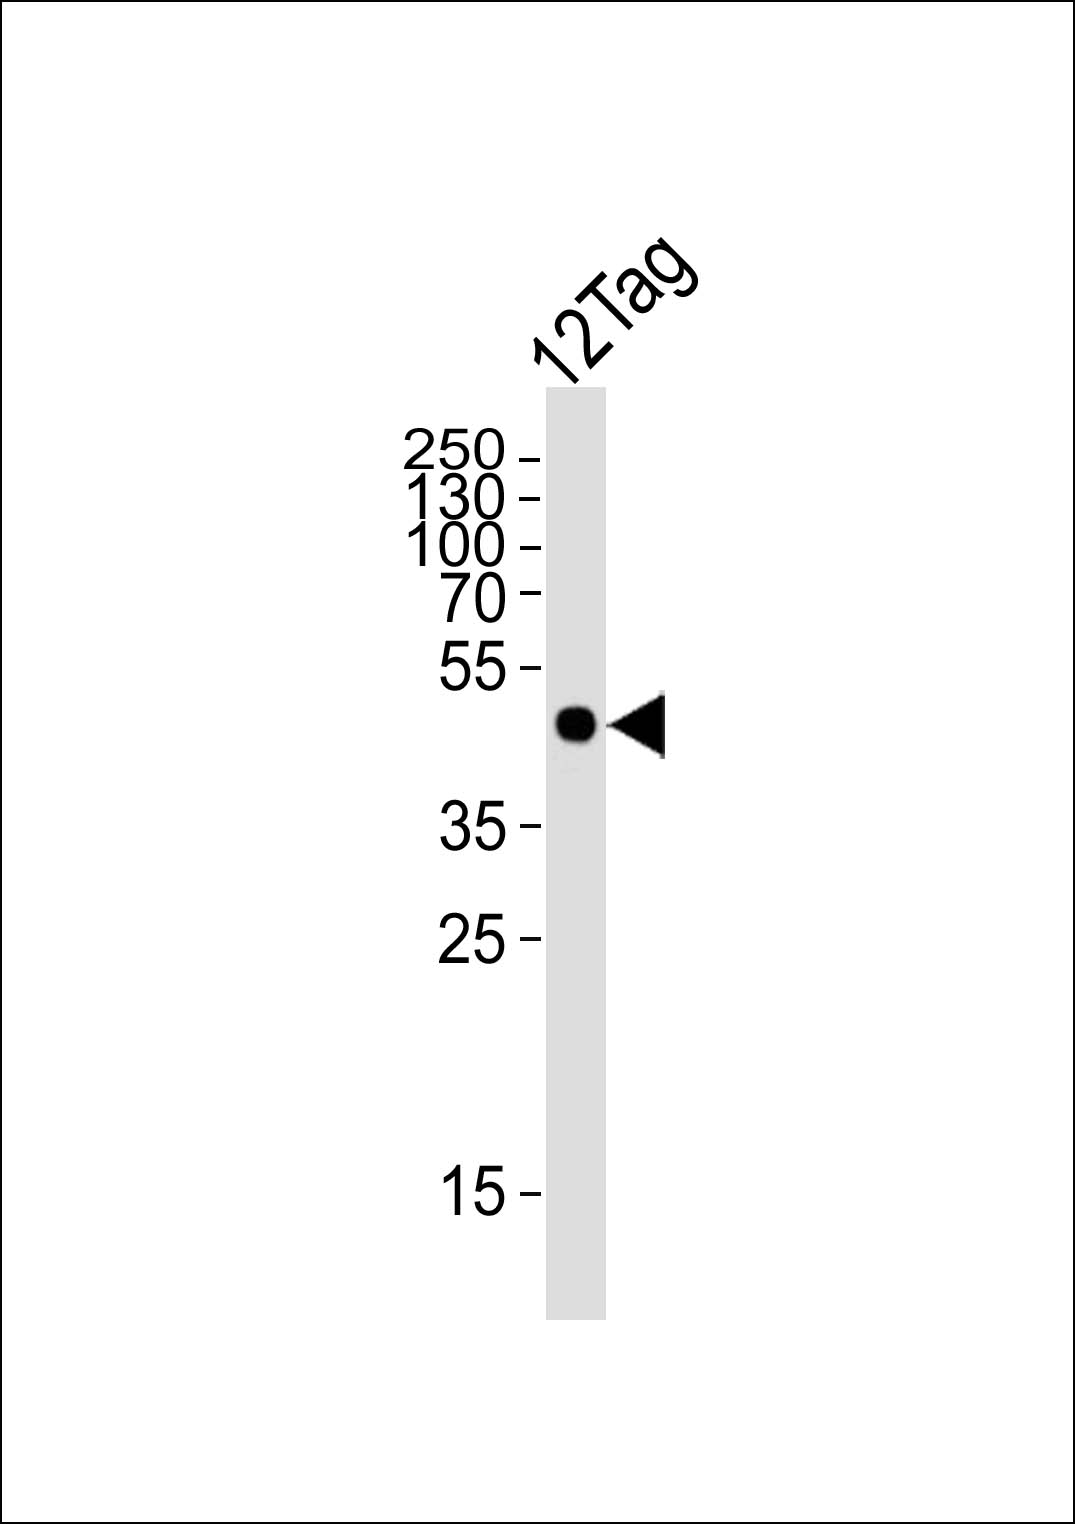 HIS Tag antibody (OAAB06612) in 12tag protein using Western Blot